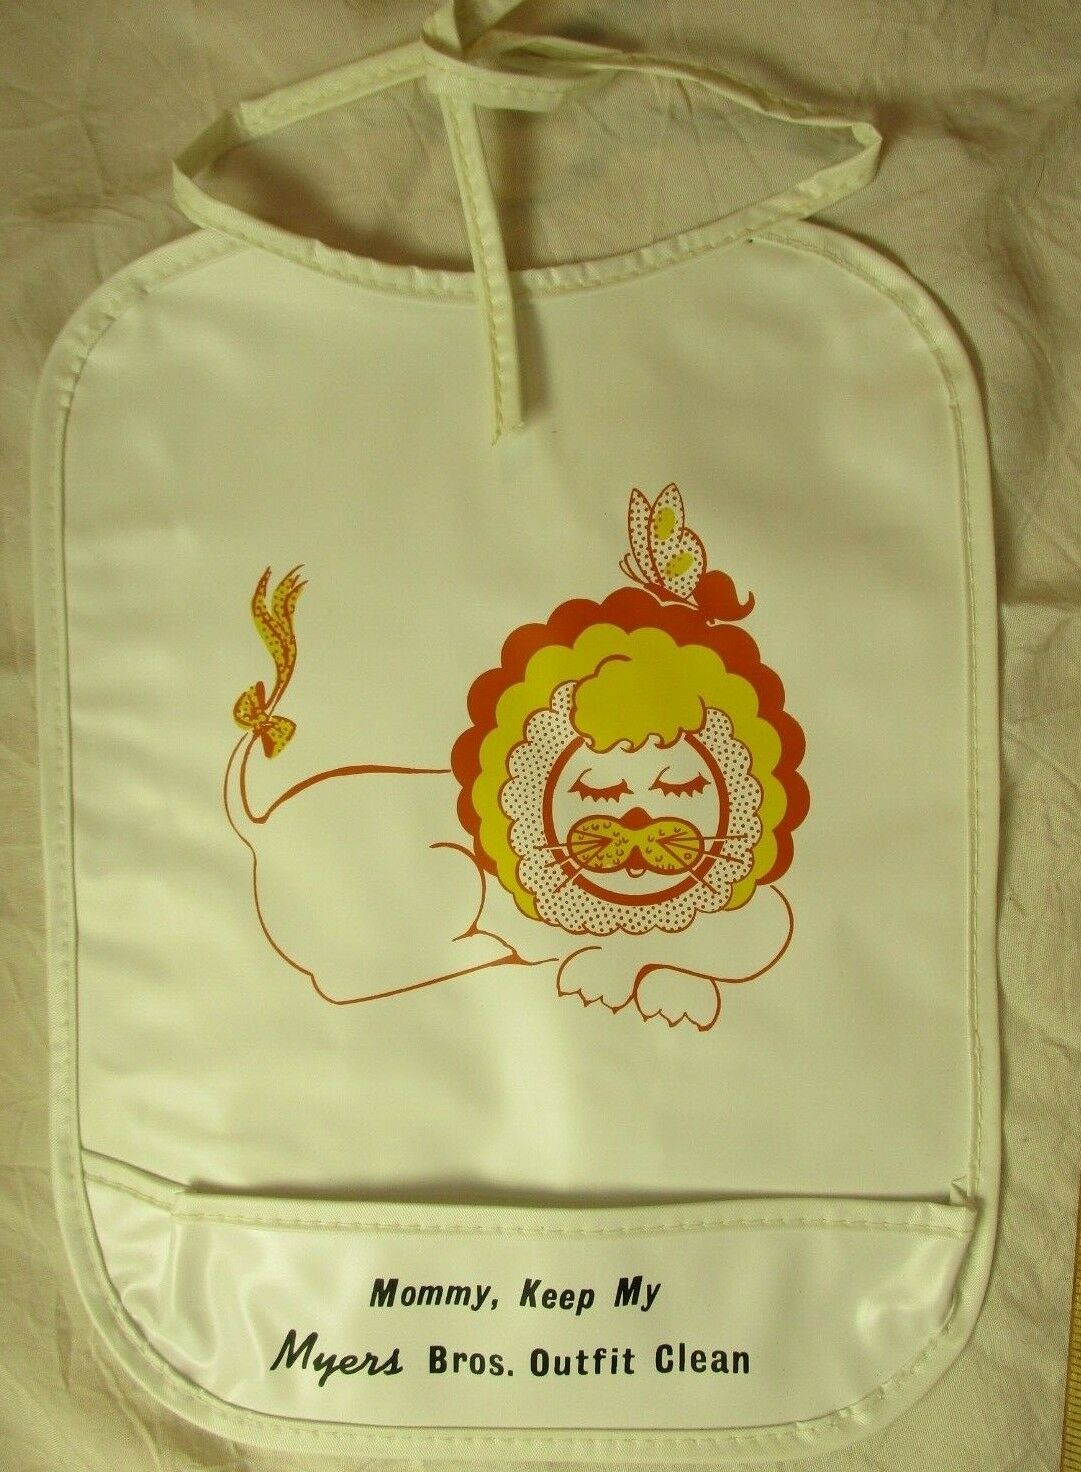 Vintage 1960s Baby Bib W Food Pocket Mommy, Keep My Myers Bros Outfit Clean Lion